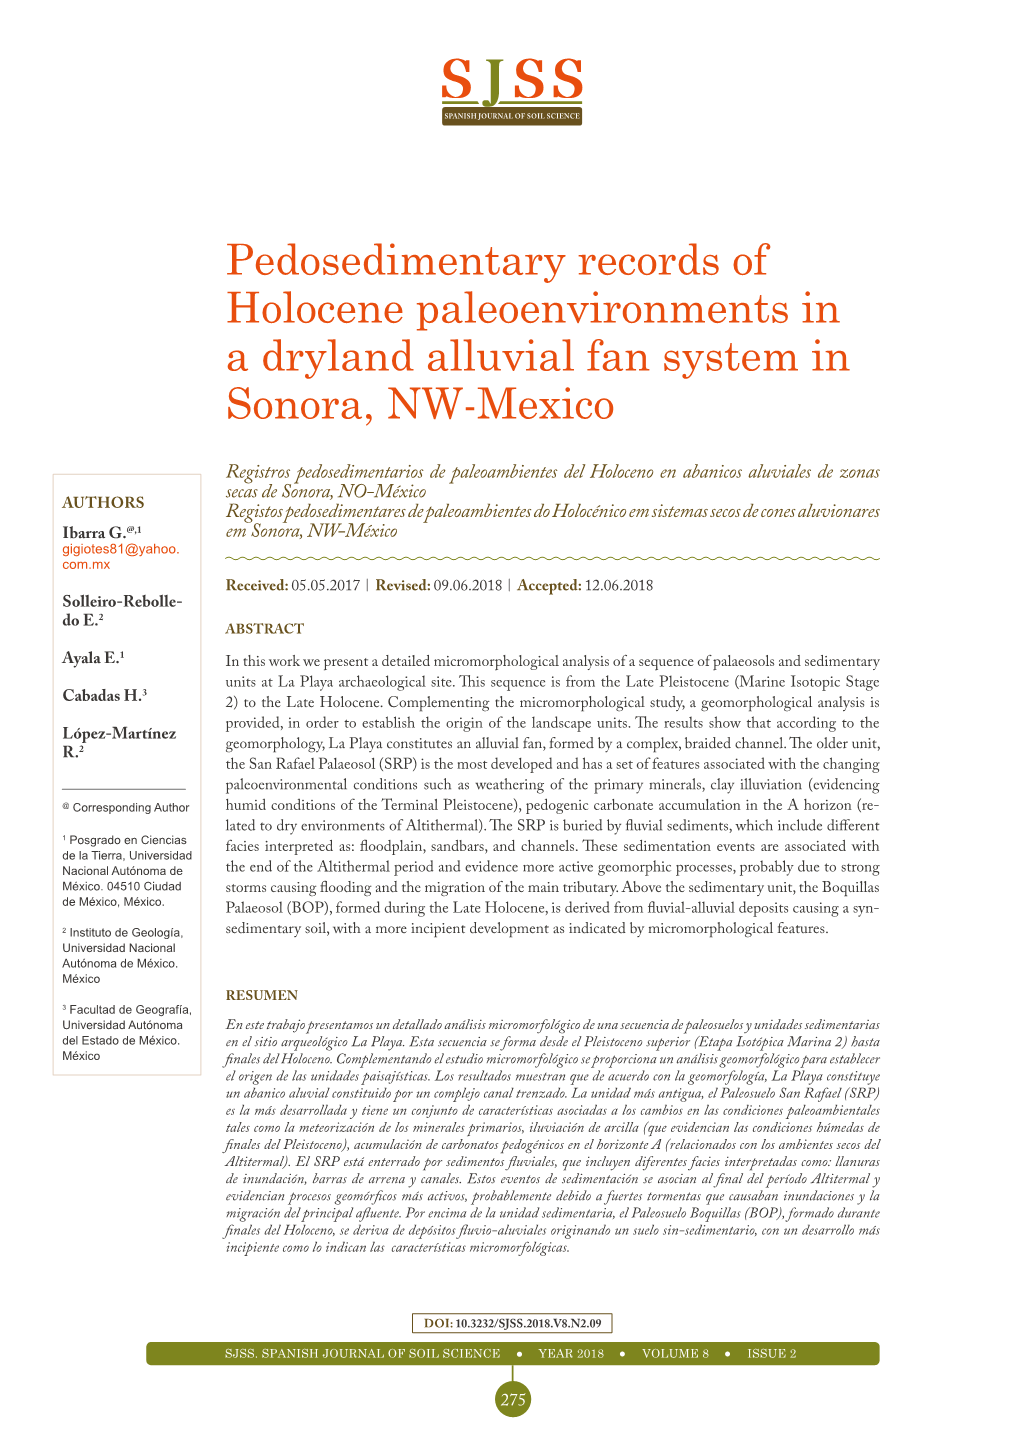 Pedosedimentary Records of Holocene Paleoenvironments in a Dryland Alluvial Fan System in Sonora, NW-Mexico